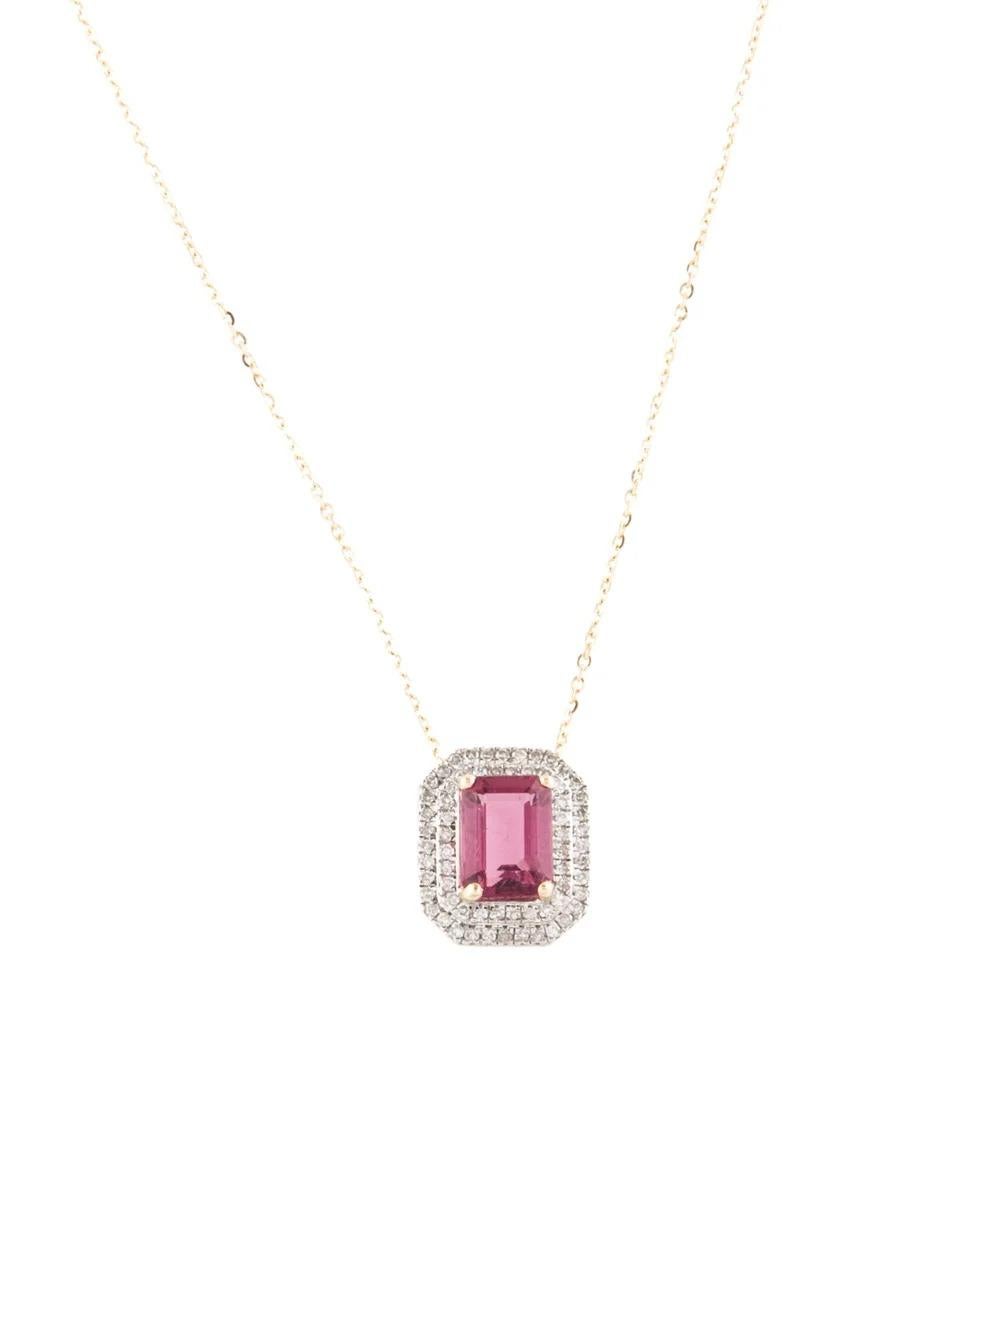 This captivating 14K Yellow Gold Pendant Necklace boasts a stunning 1.58 Carat Emerald Cut Tourmaline, accented by 64 dazzling Single Cut Diamonds totaling 0.35 carats. Crafted to perfection, this necklace exudes elegance and sophistication, making